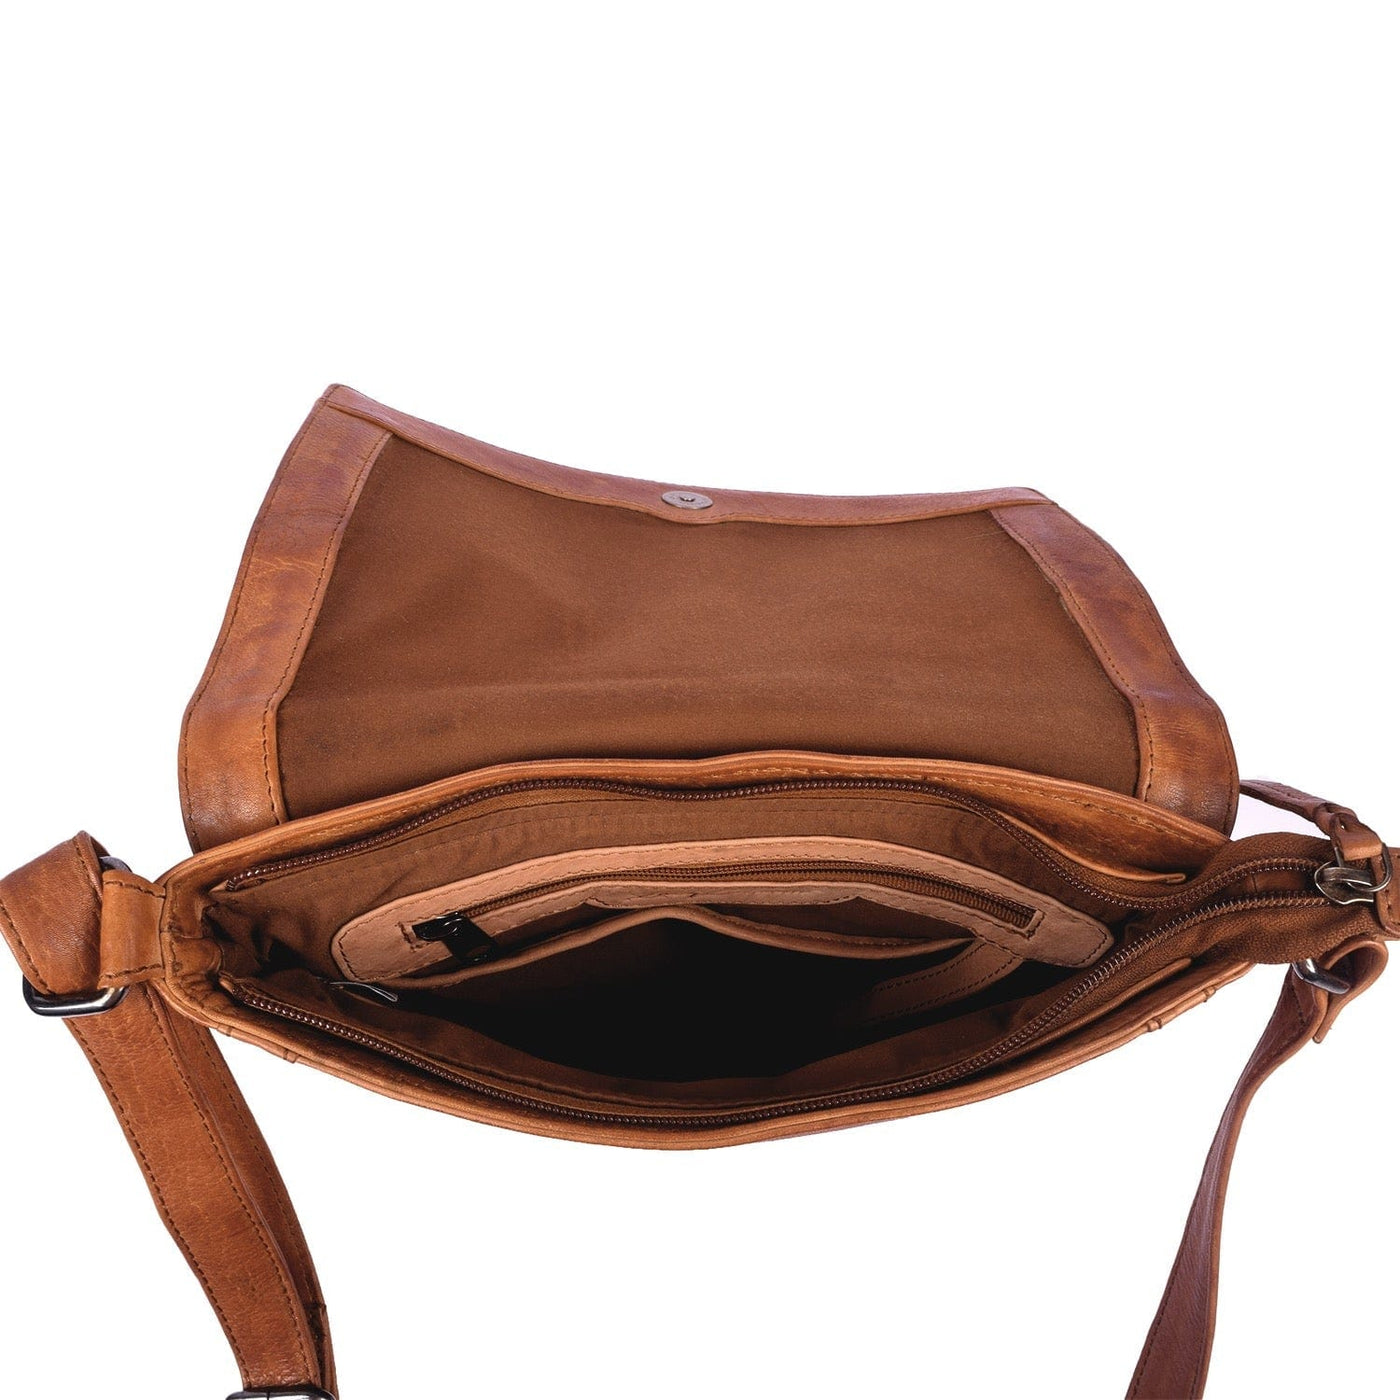 The Concealed Carry Monroe Crossbody